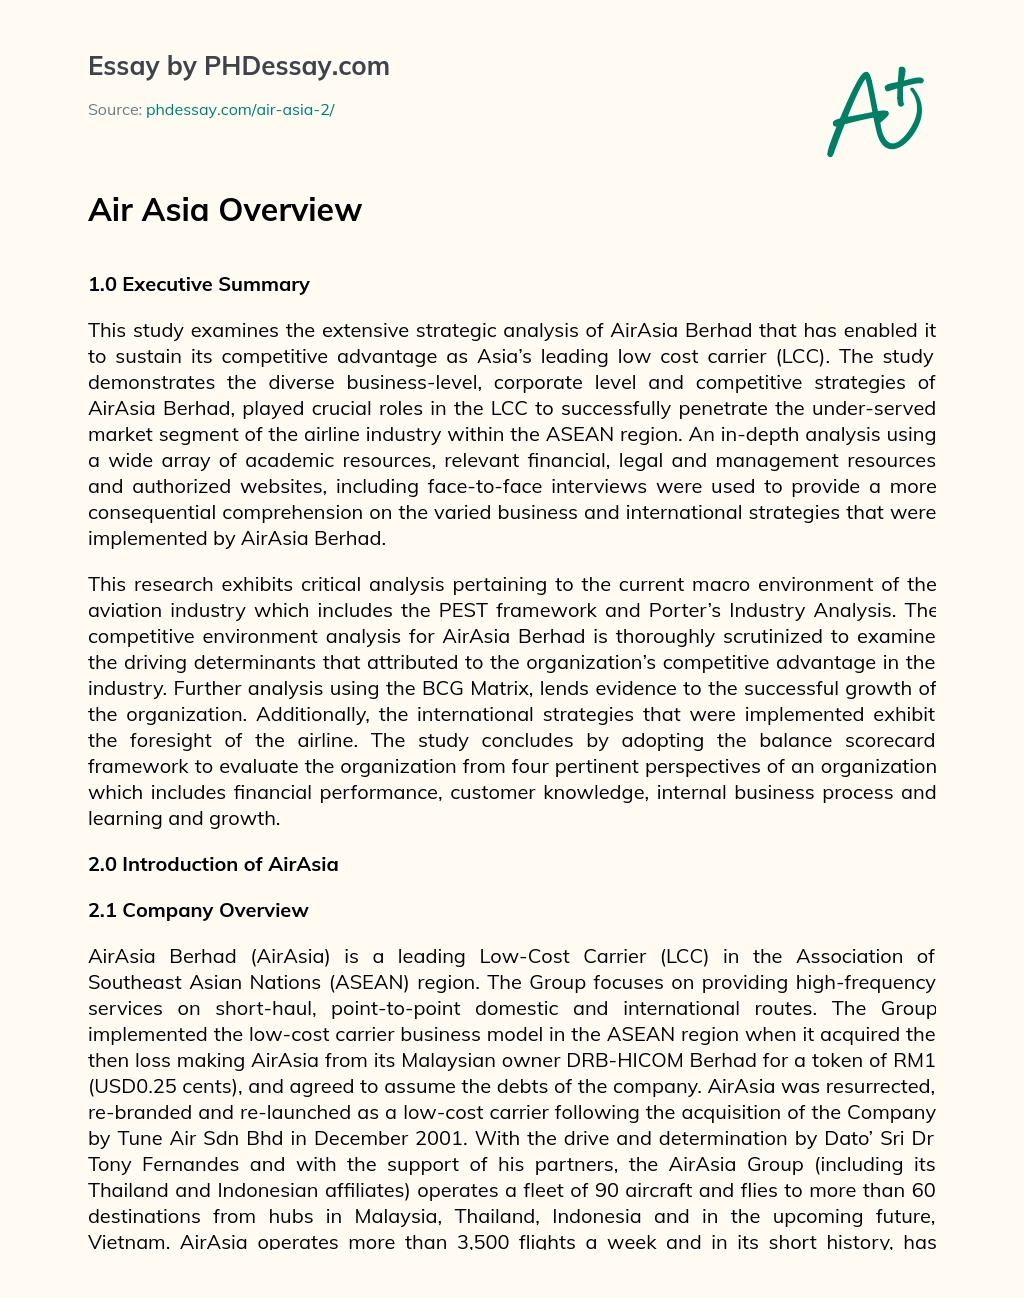 Air Asia Overview essay